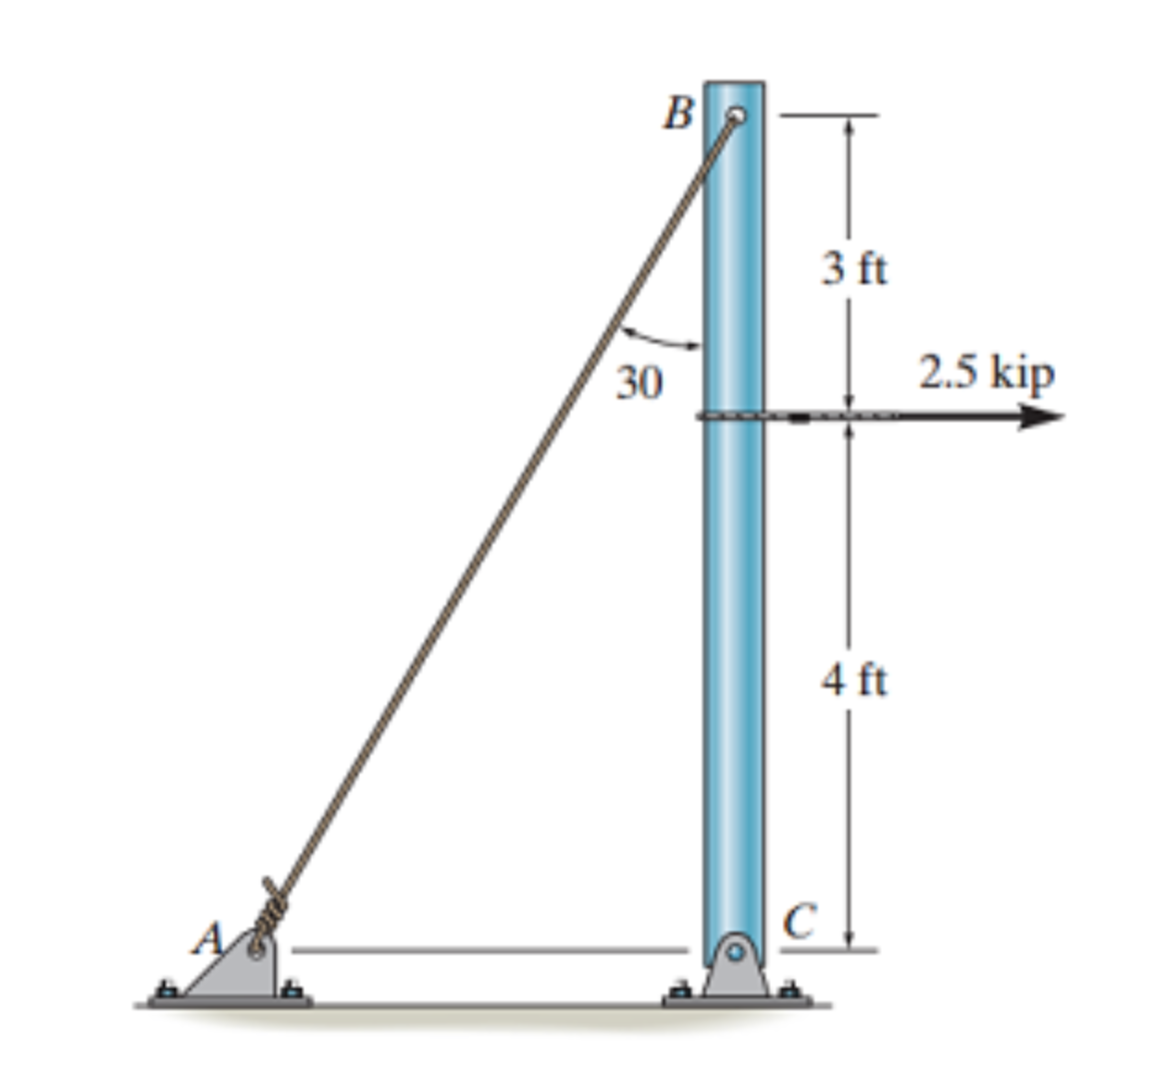 pole guy wire calculation